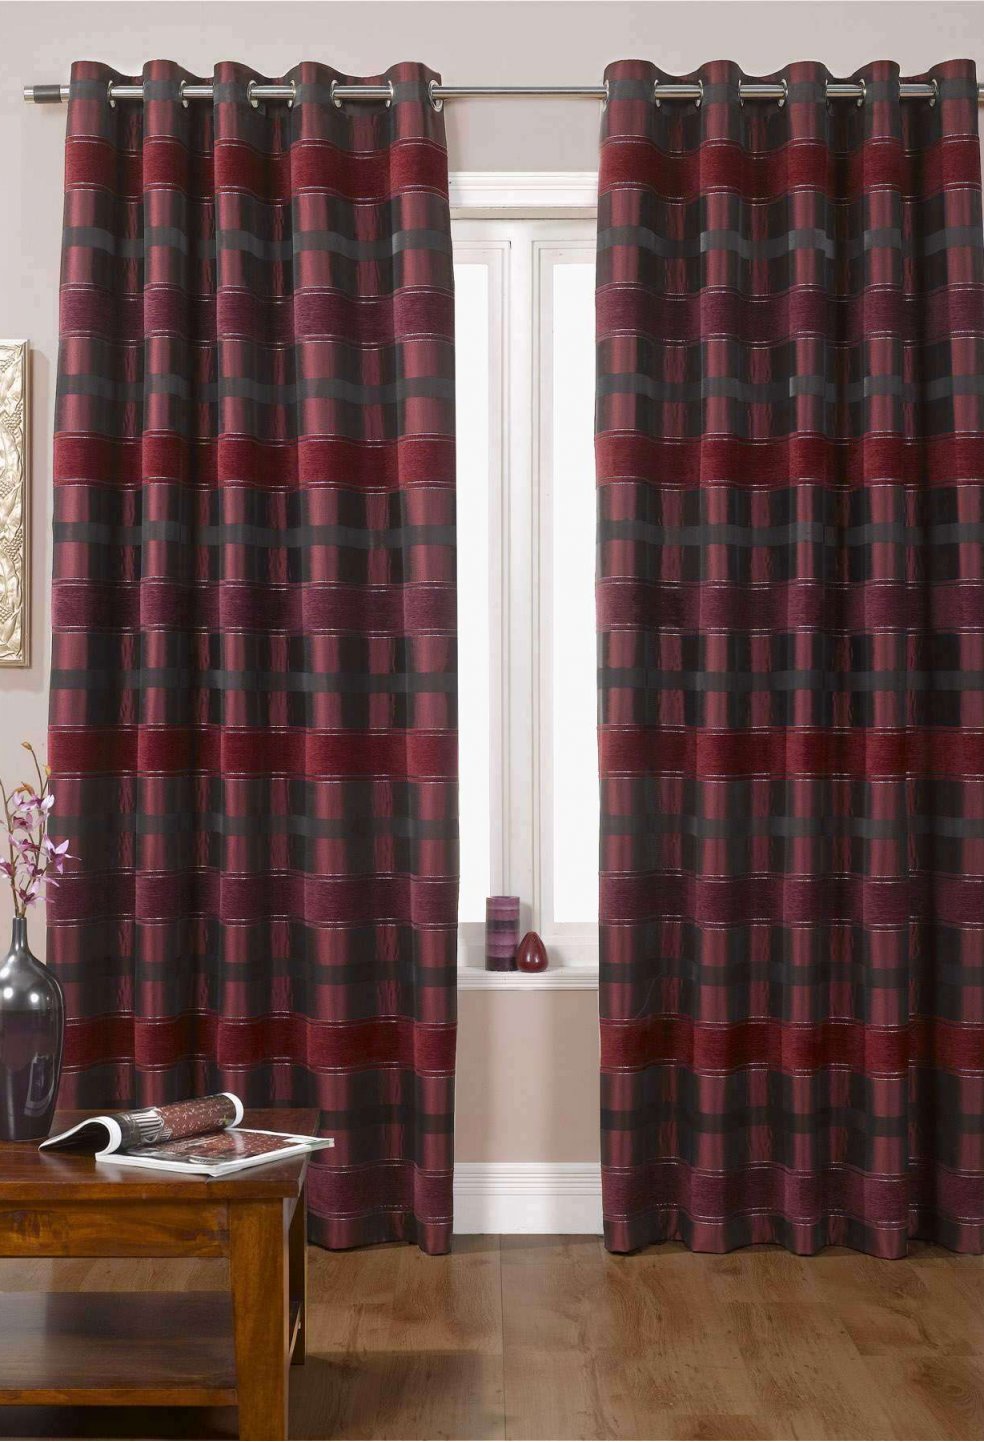 Wine Curtains in Curtain